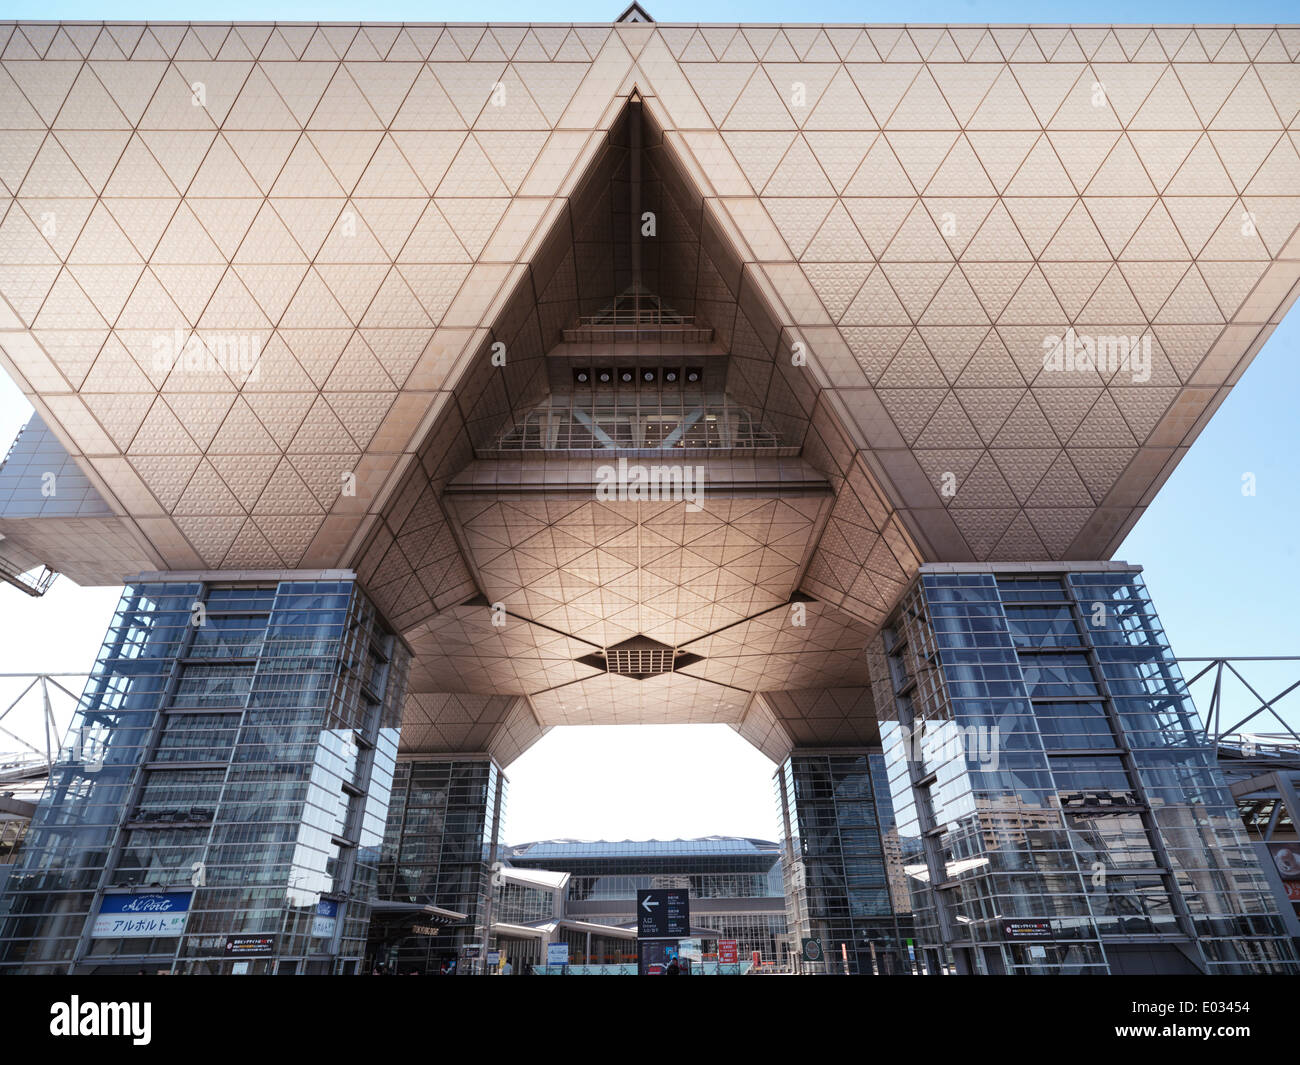 Licence disponible sur MaximImages.com - The Conference Tower of Tokyo International Exhibition Centre - Big Sight. Ariake, Odaiba, Tokyo, Japon. Banque D'Images